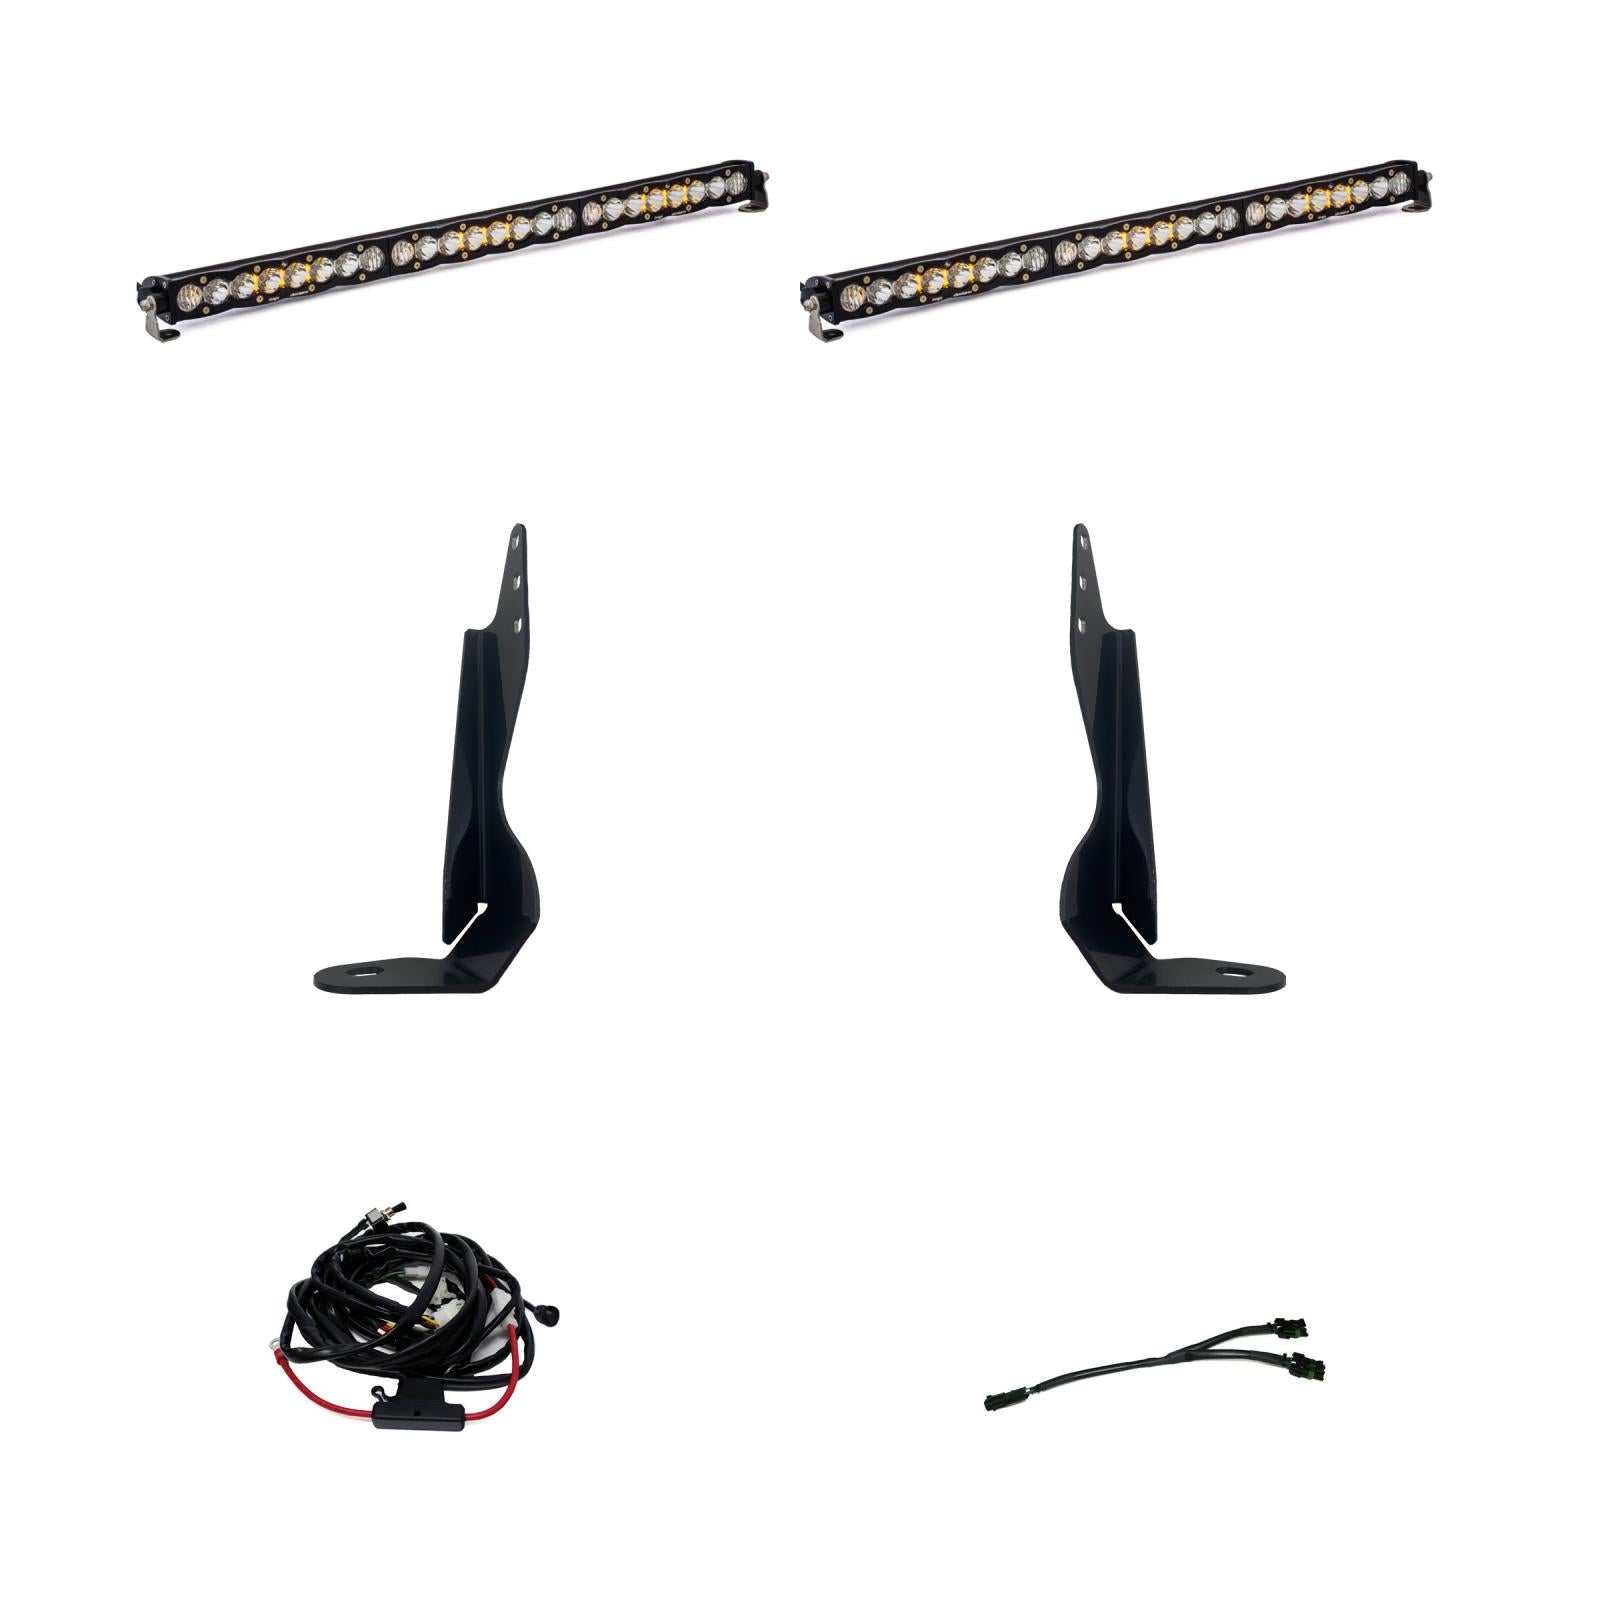 '20-22 Chevy/GMC 2500/3500 Baja Designs Dual 30" S8 Behind the Grille LED Light Bar Kit parts